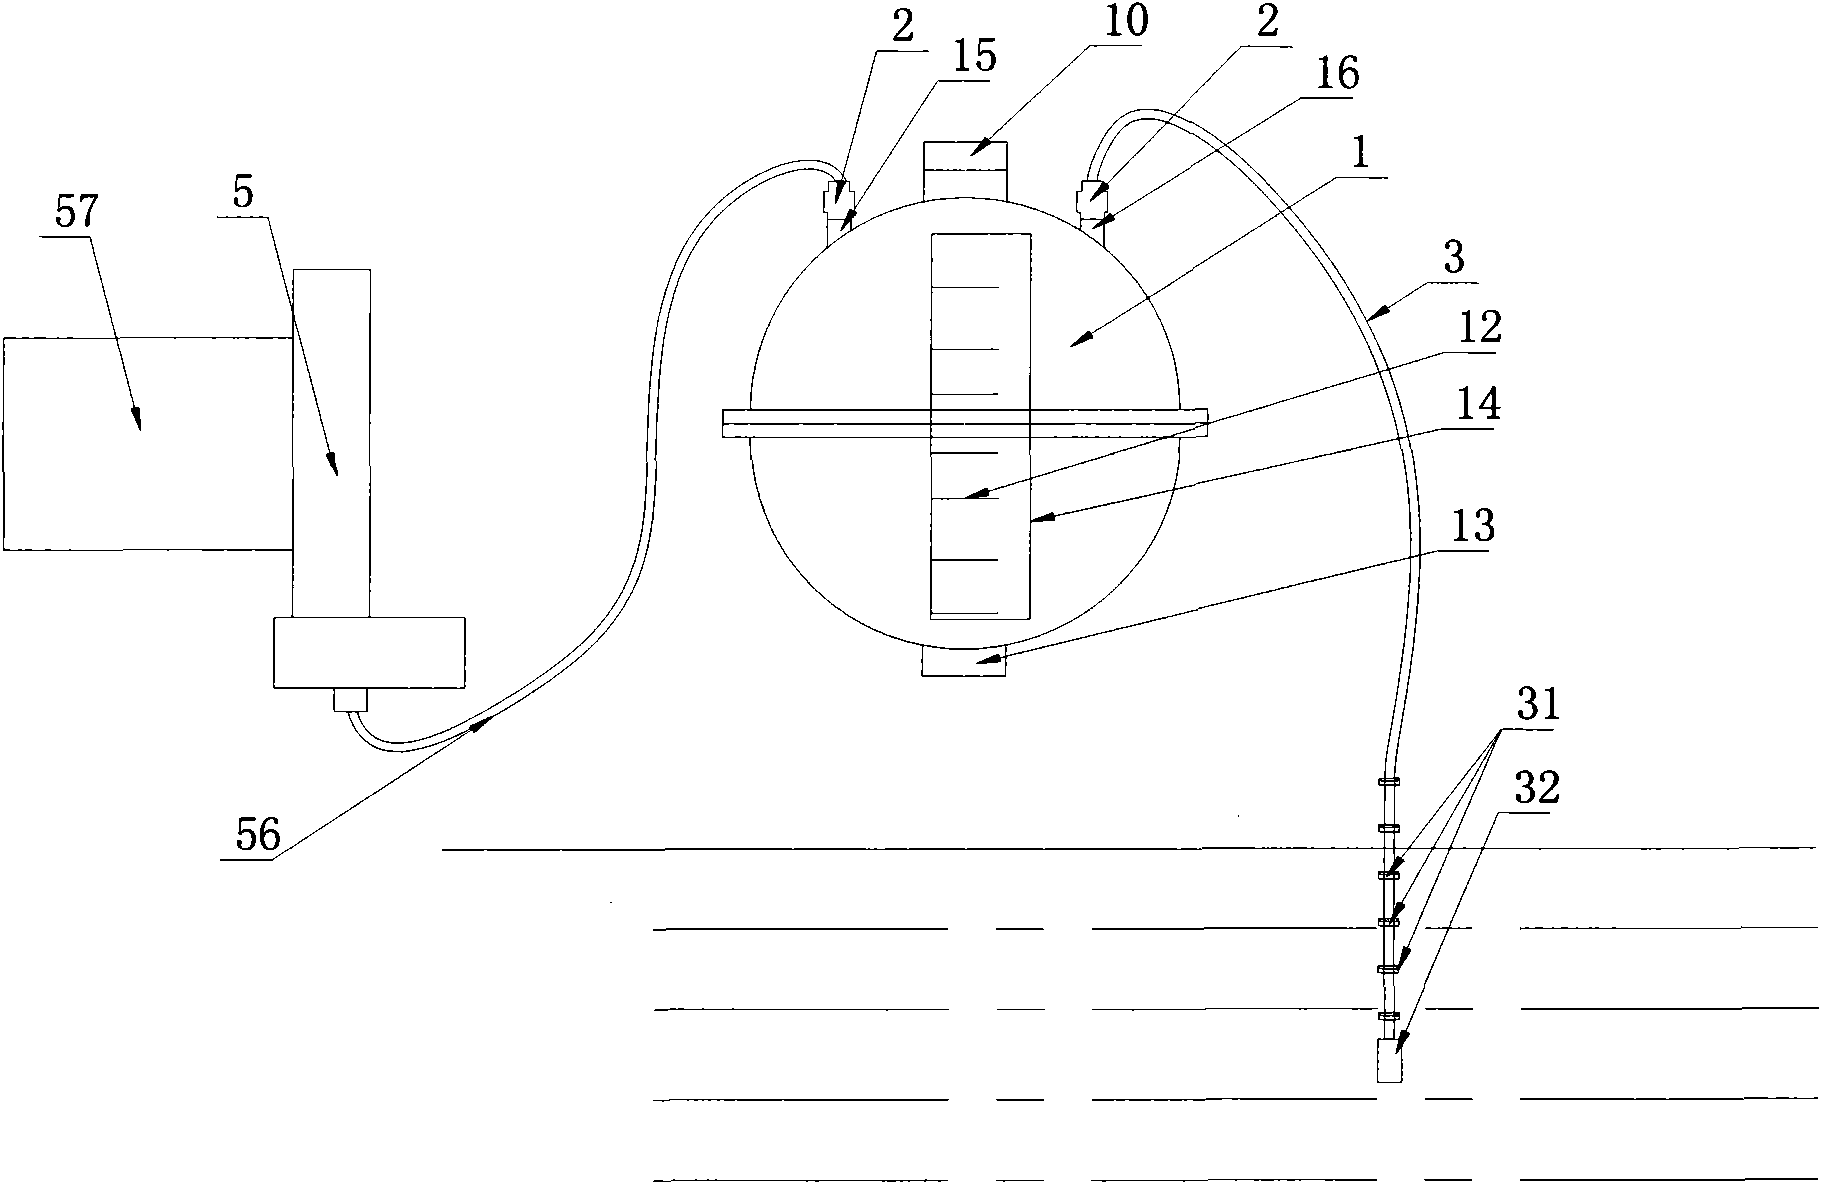 Ship ballast water collection device